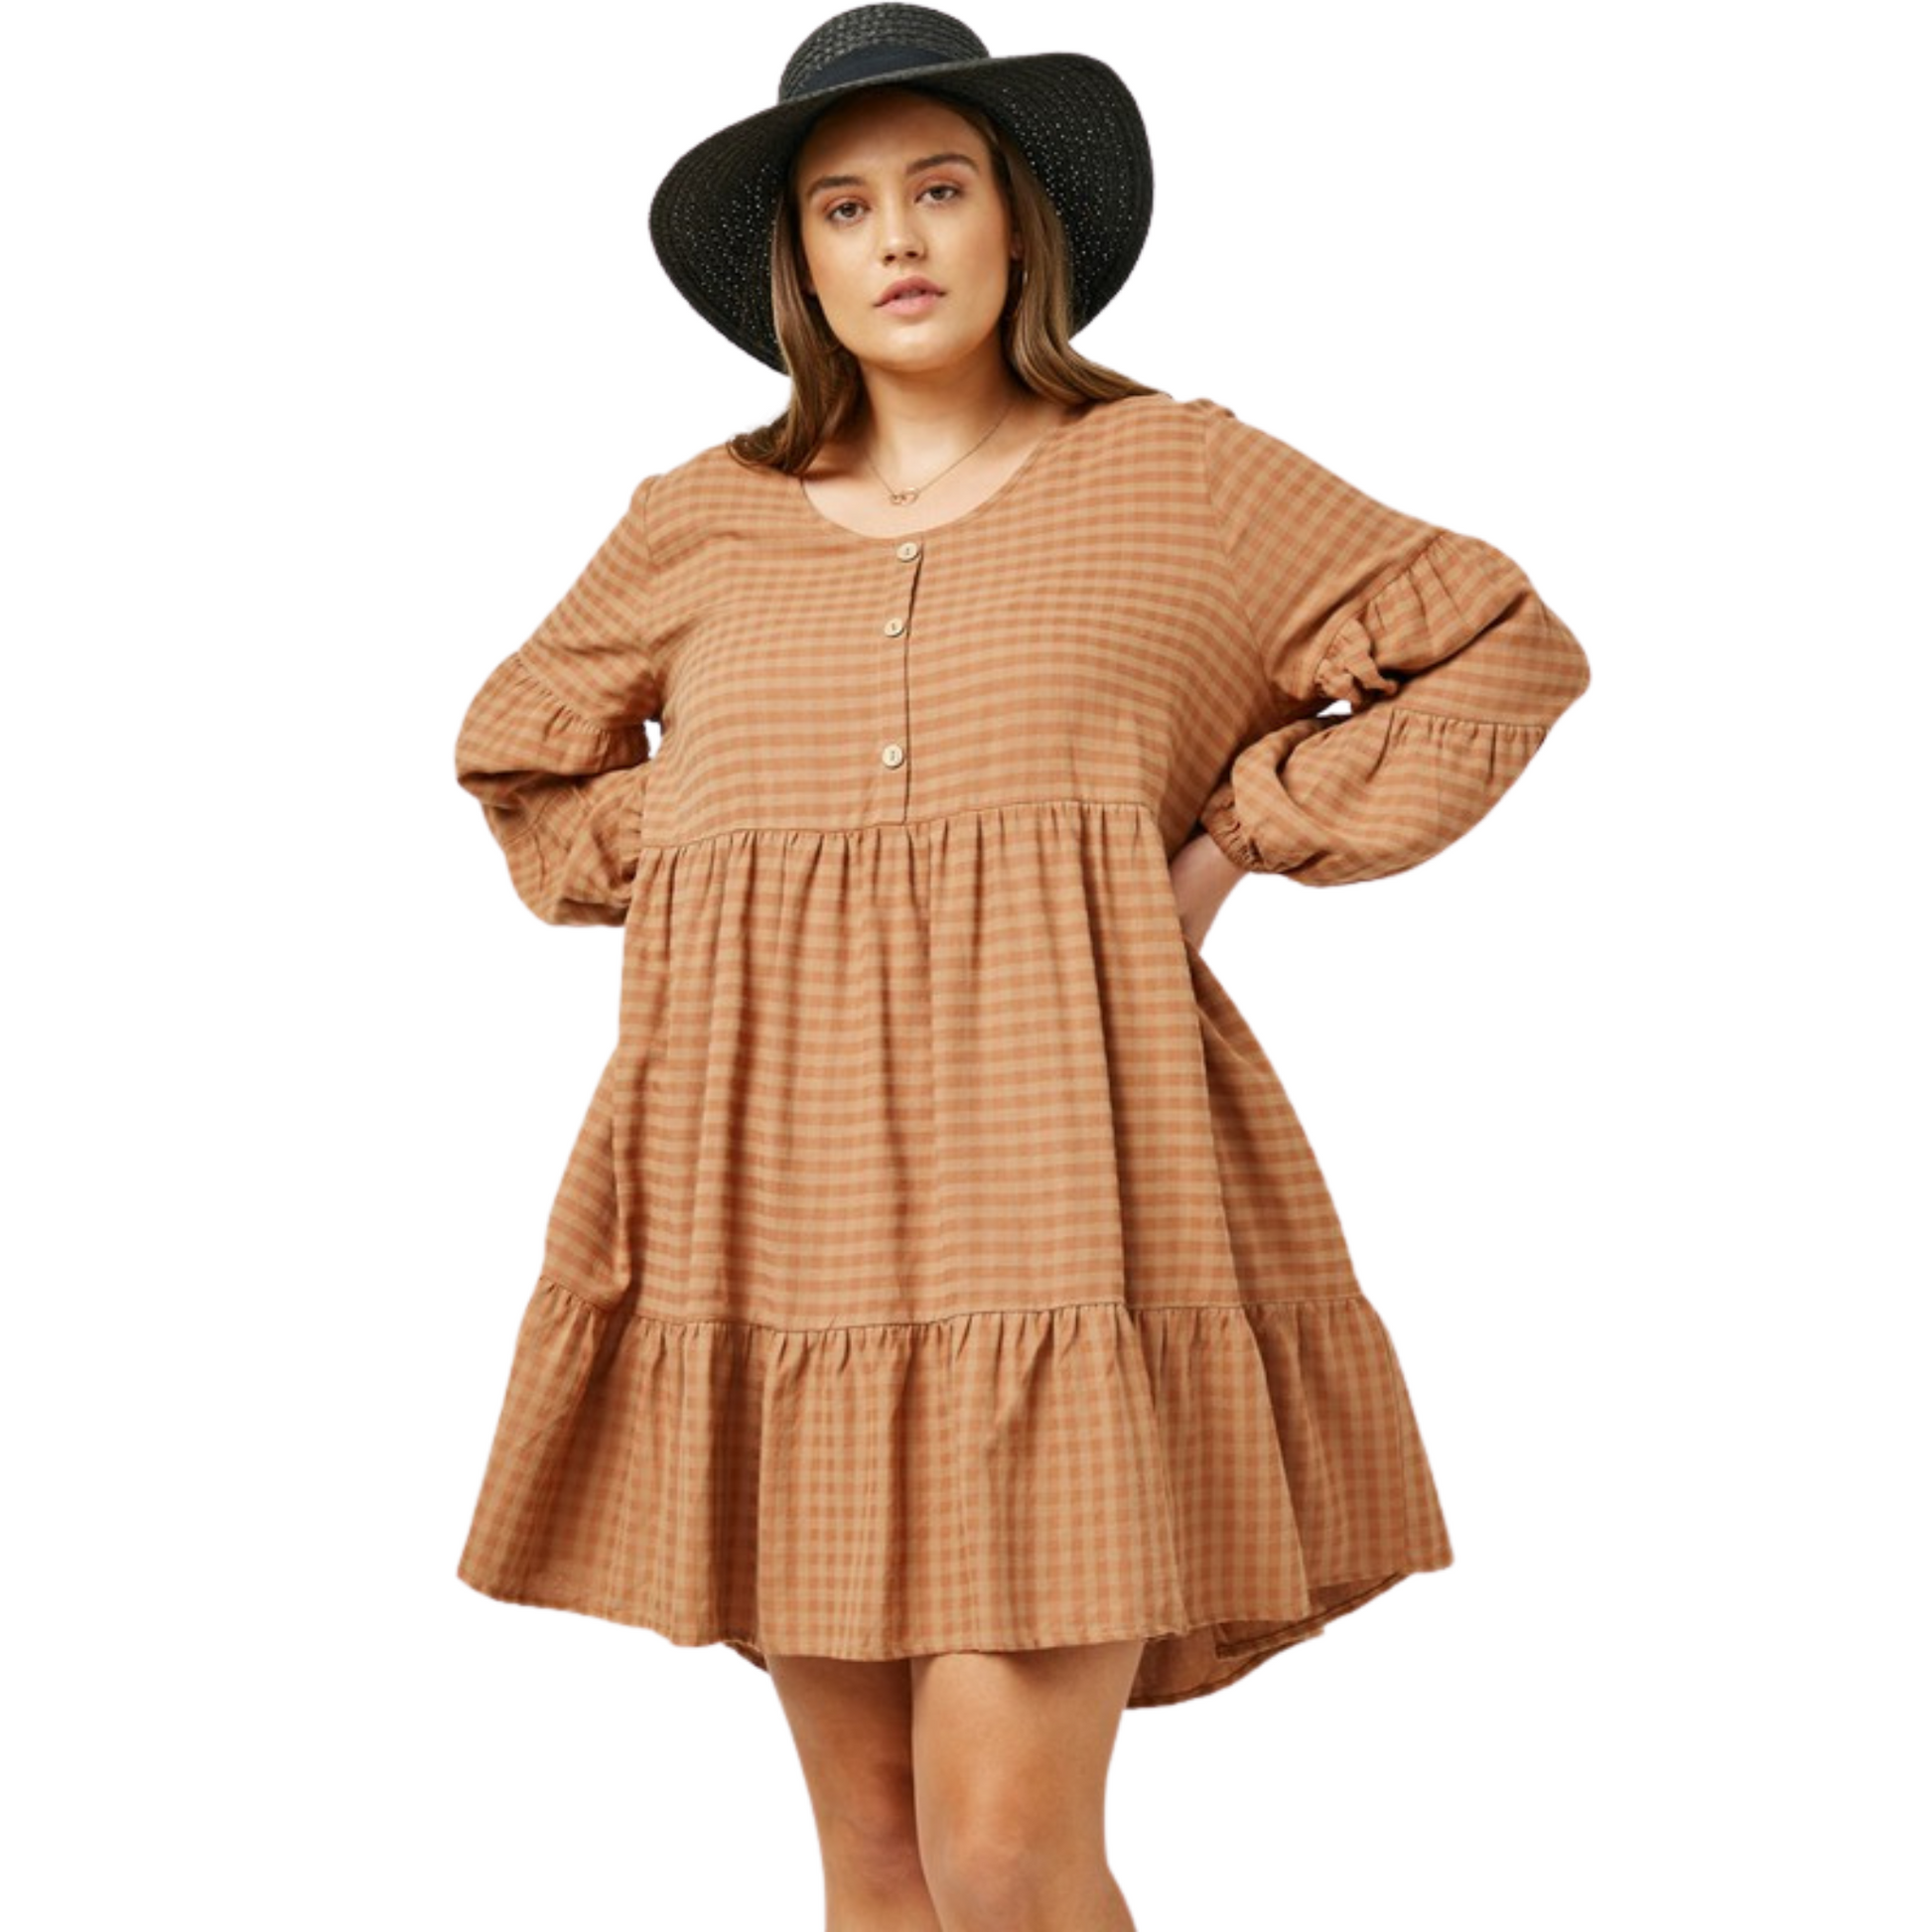 This timeless plus-size gingham dress will add an elegant touch to your wardrobe. Crafted from a lightweight woven fabric with a tiered skirt and decorative front buttons, it is both comfortable and fashionable. Available in a soft taupe shade, it's perfect for all occasions.